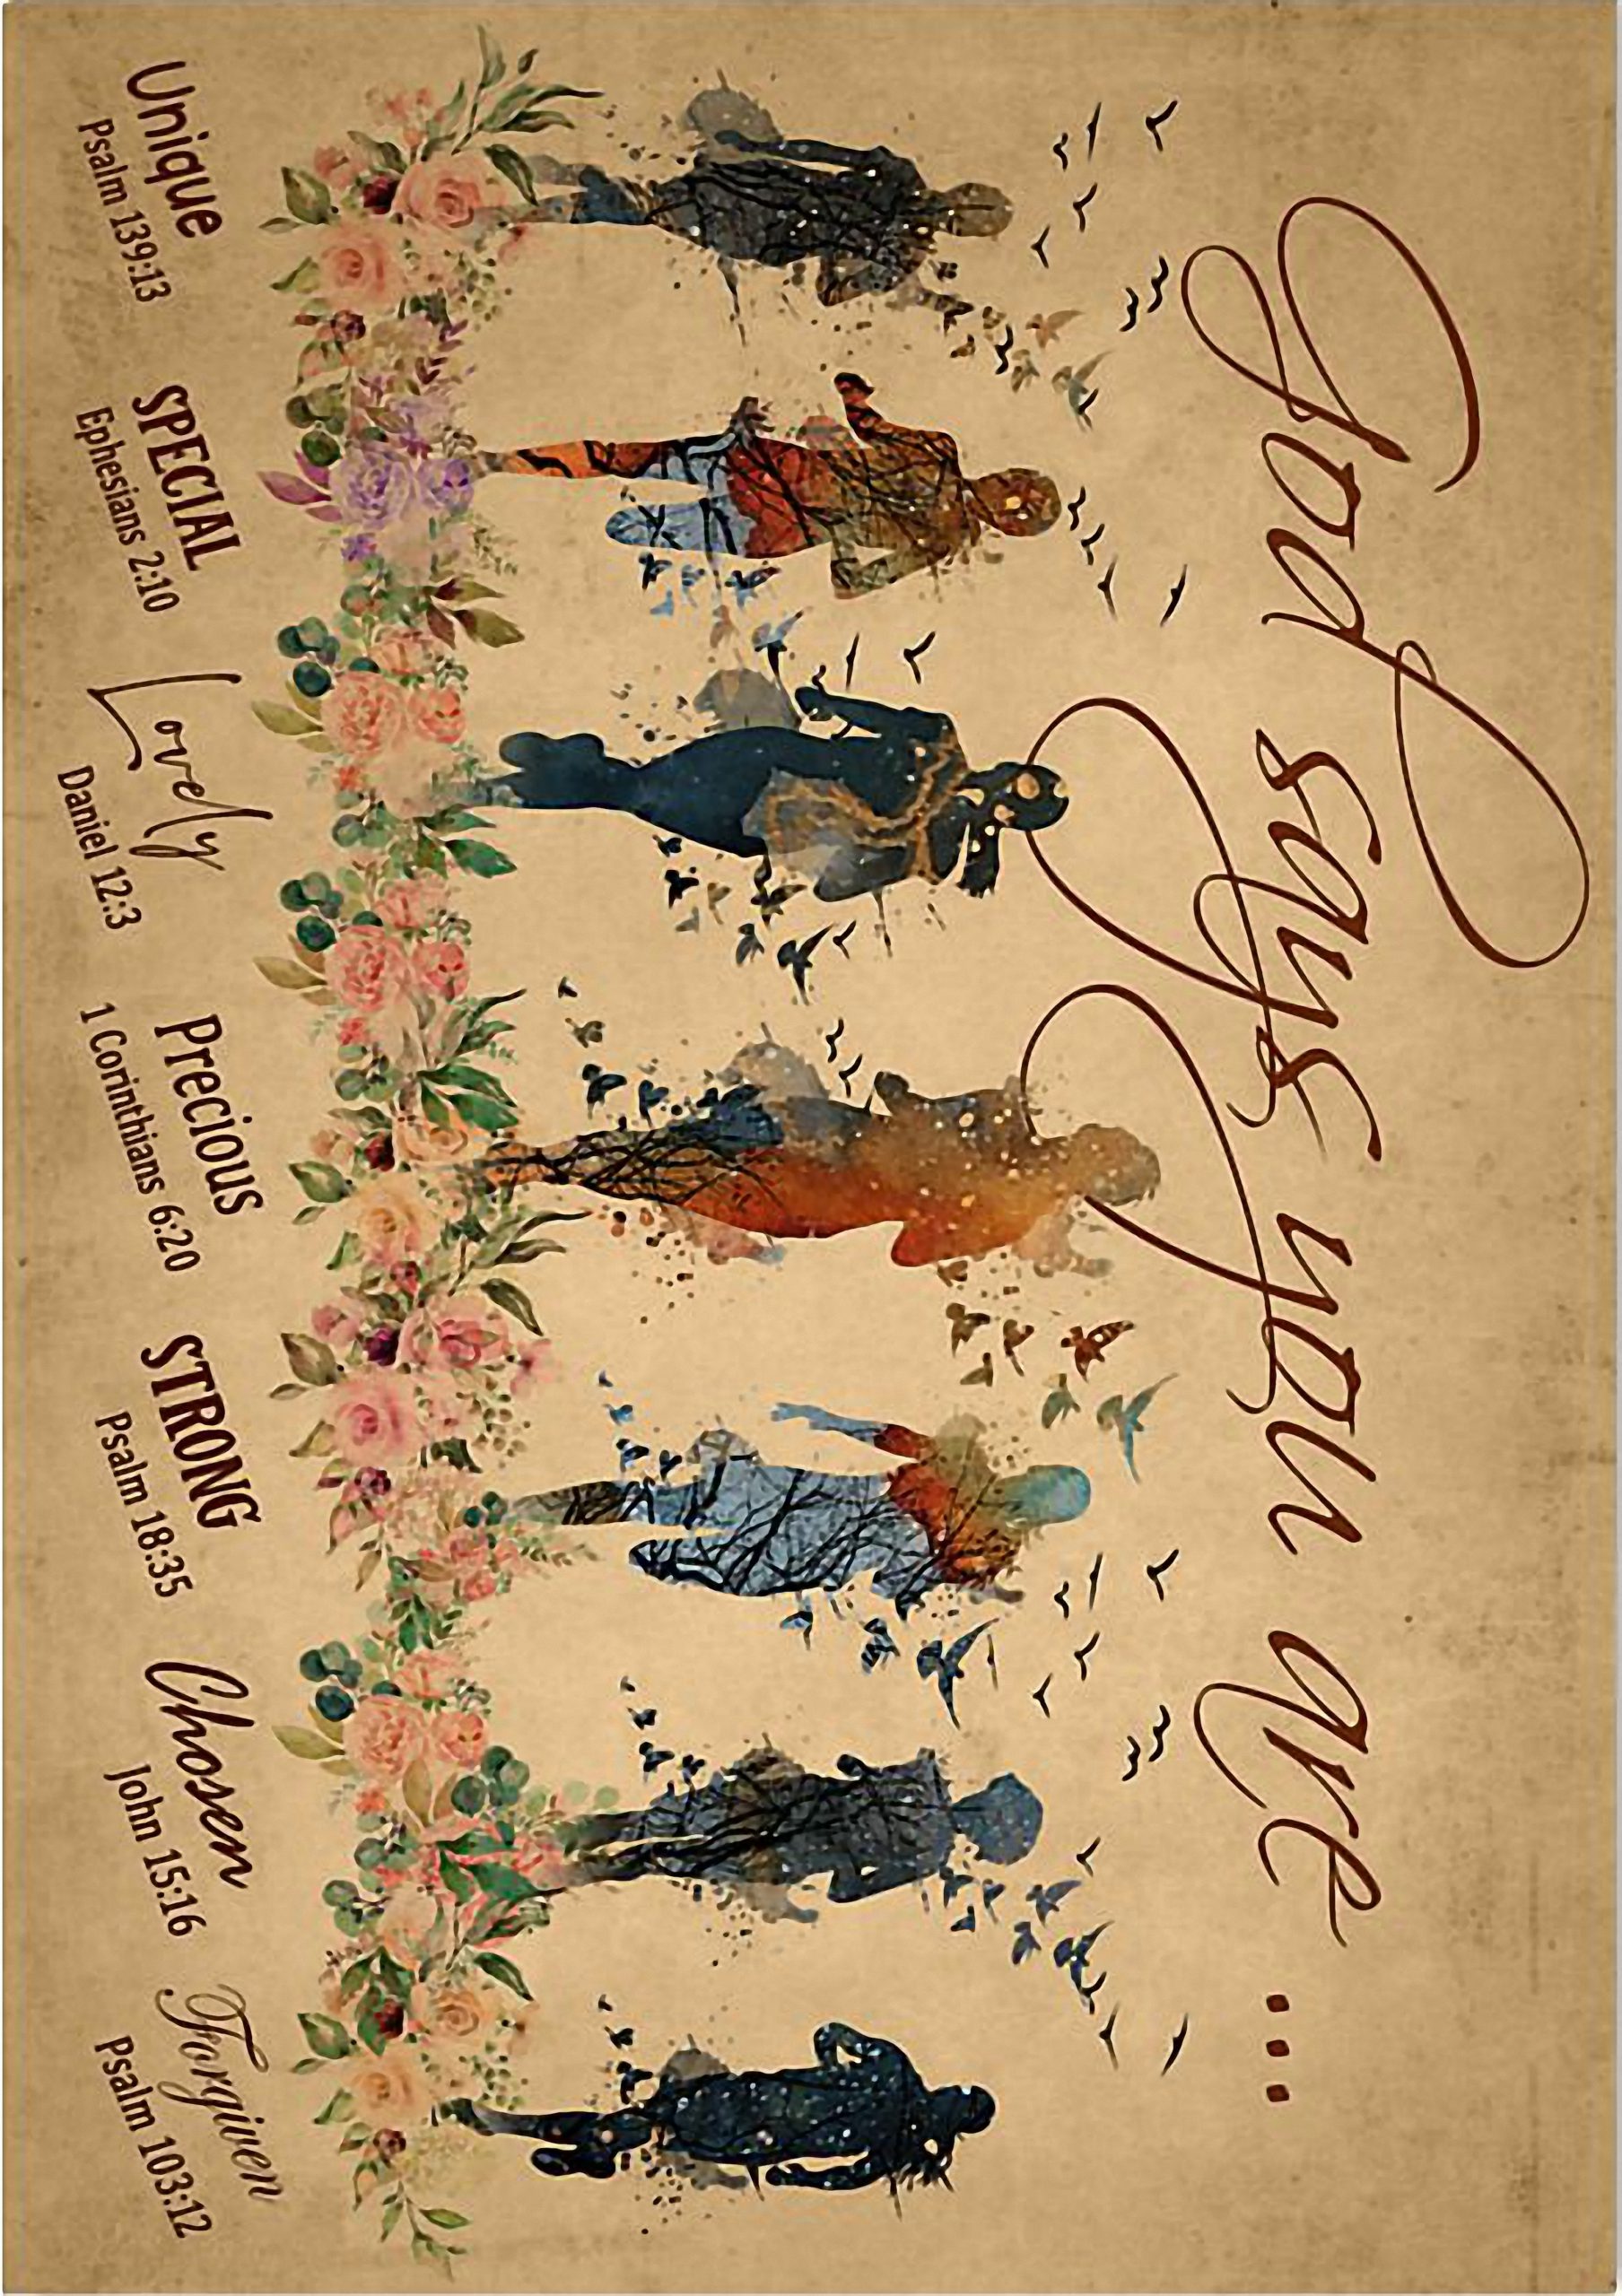 Running woman god says you are unique special lovely precious strong chosen forgiven poster